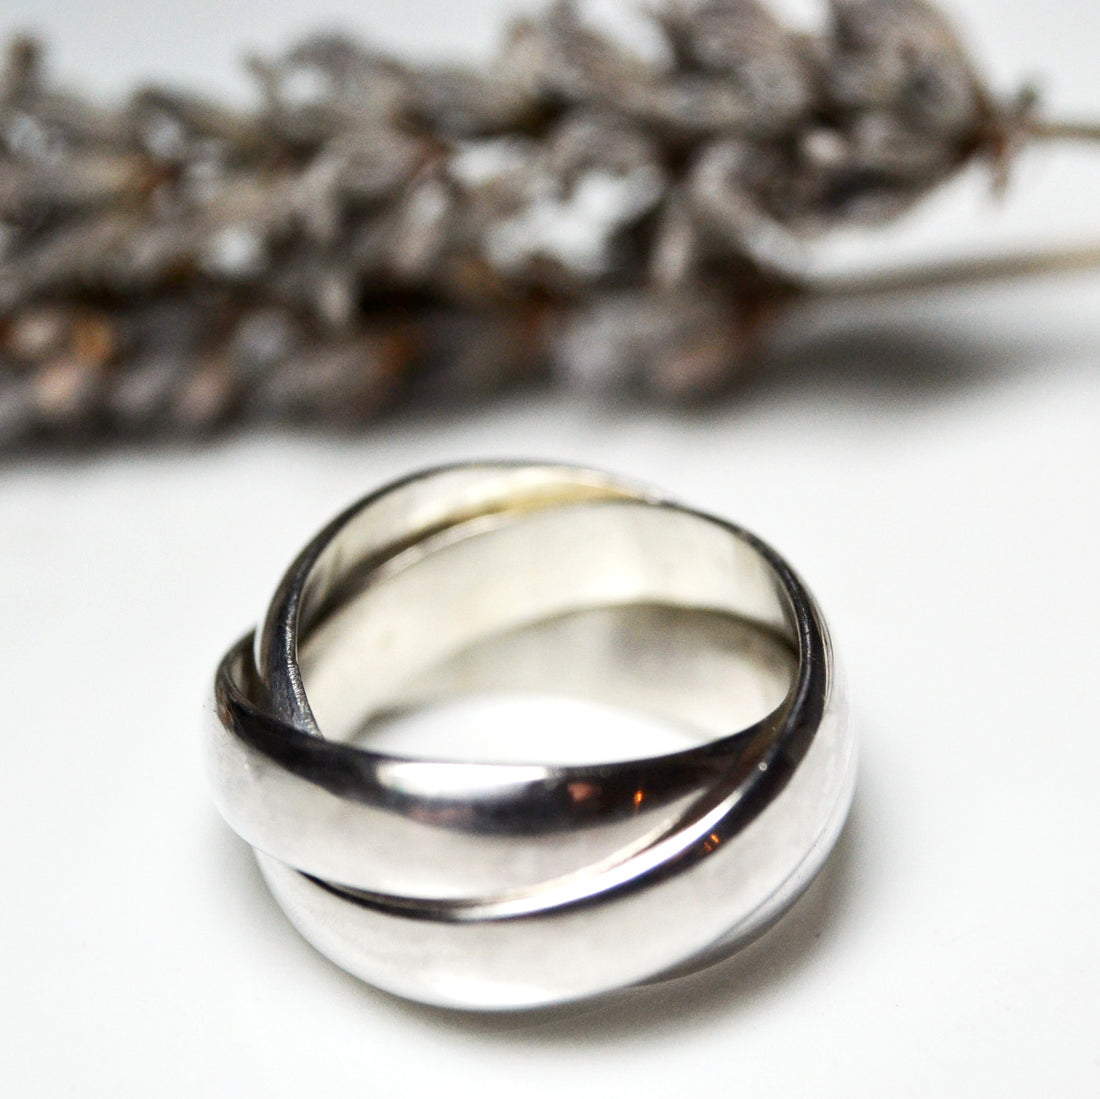 Make a Chunky Russian Wedding Ring with me